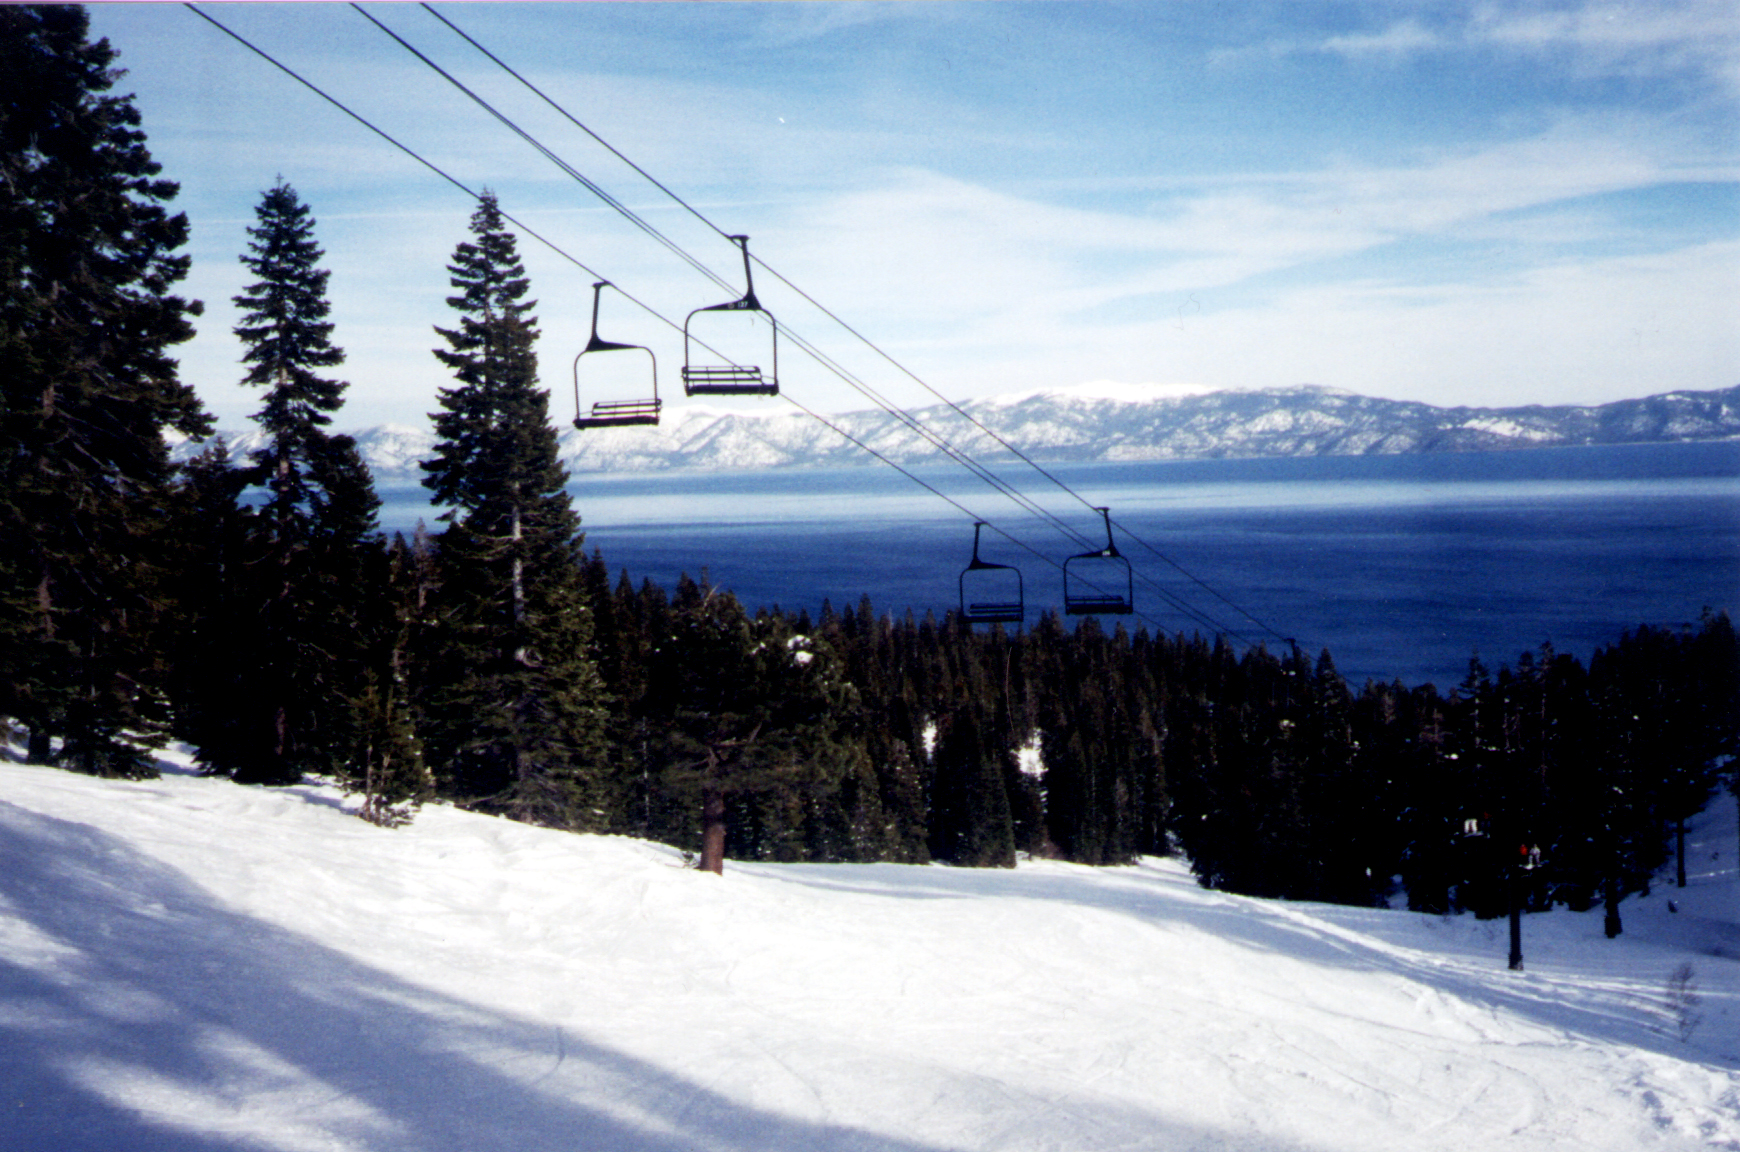 Ski/ride for $19-$44 in December | Skiing on the Tahoe summit